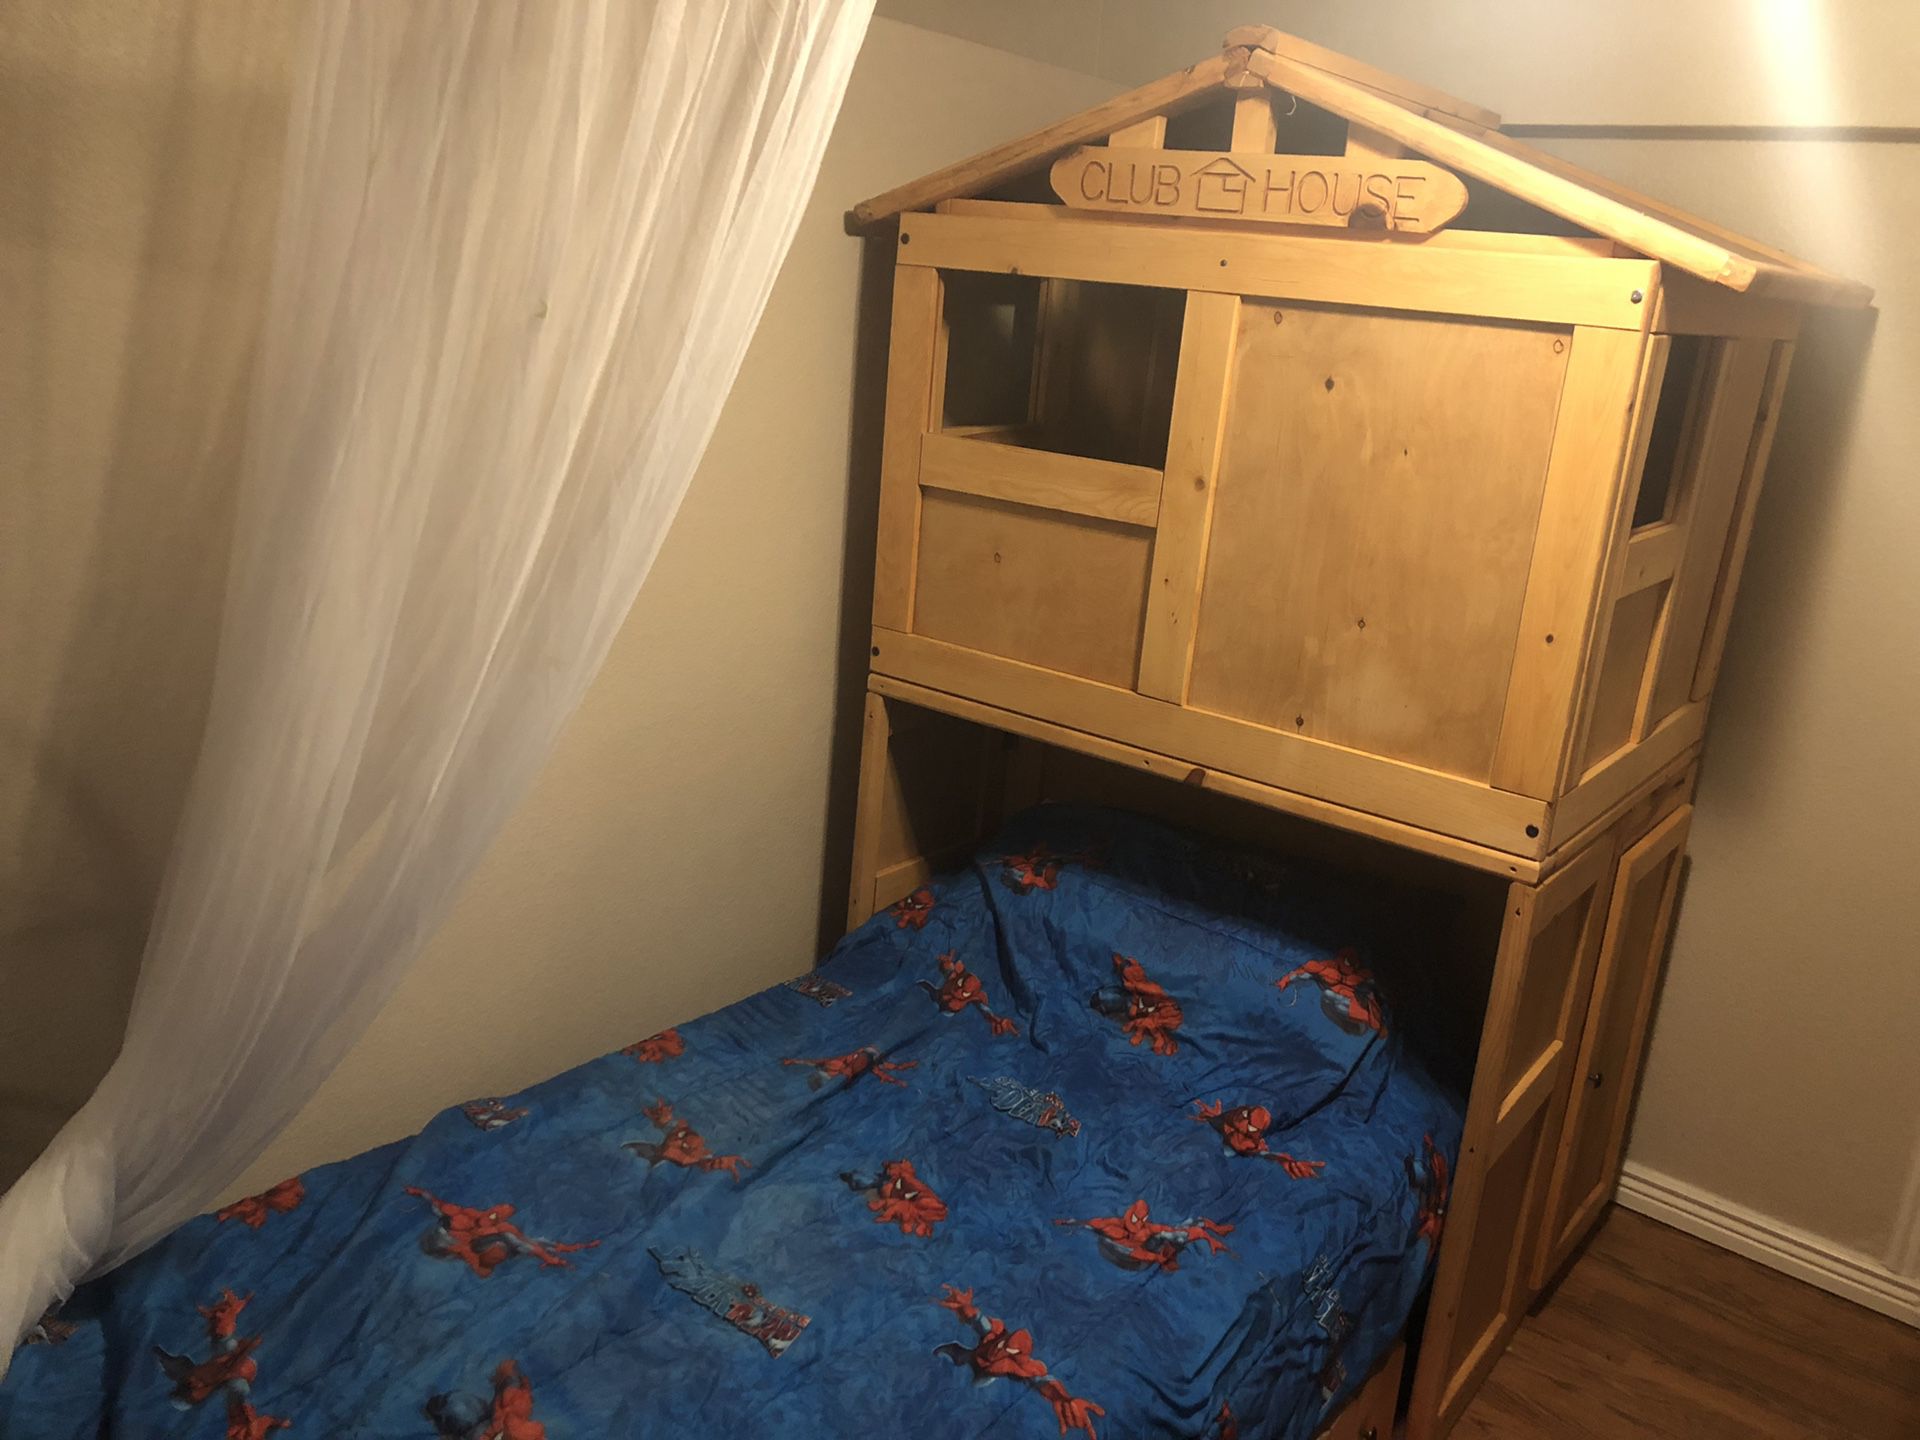 Kids clubhouse bed